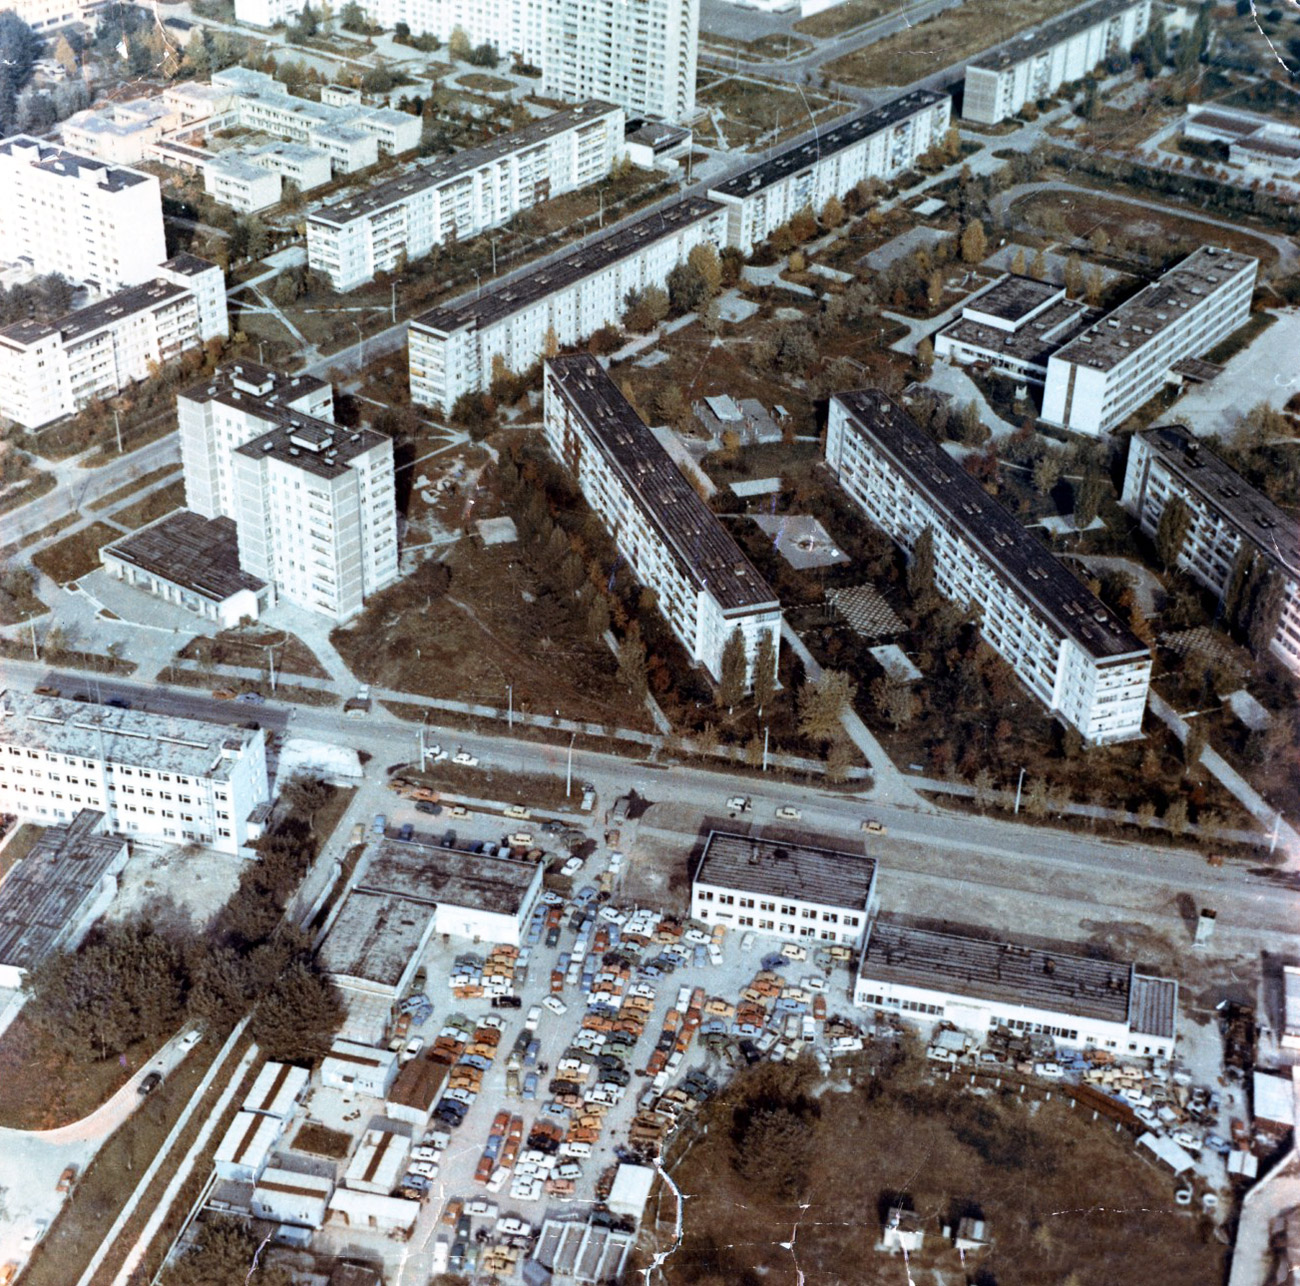 After residents were evacuated from Pripyat and other nearby settlements, a 30-kilometer exclusion zone was set up around the nuclear facility.